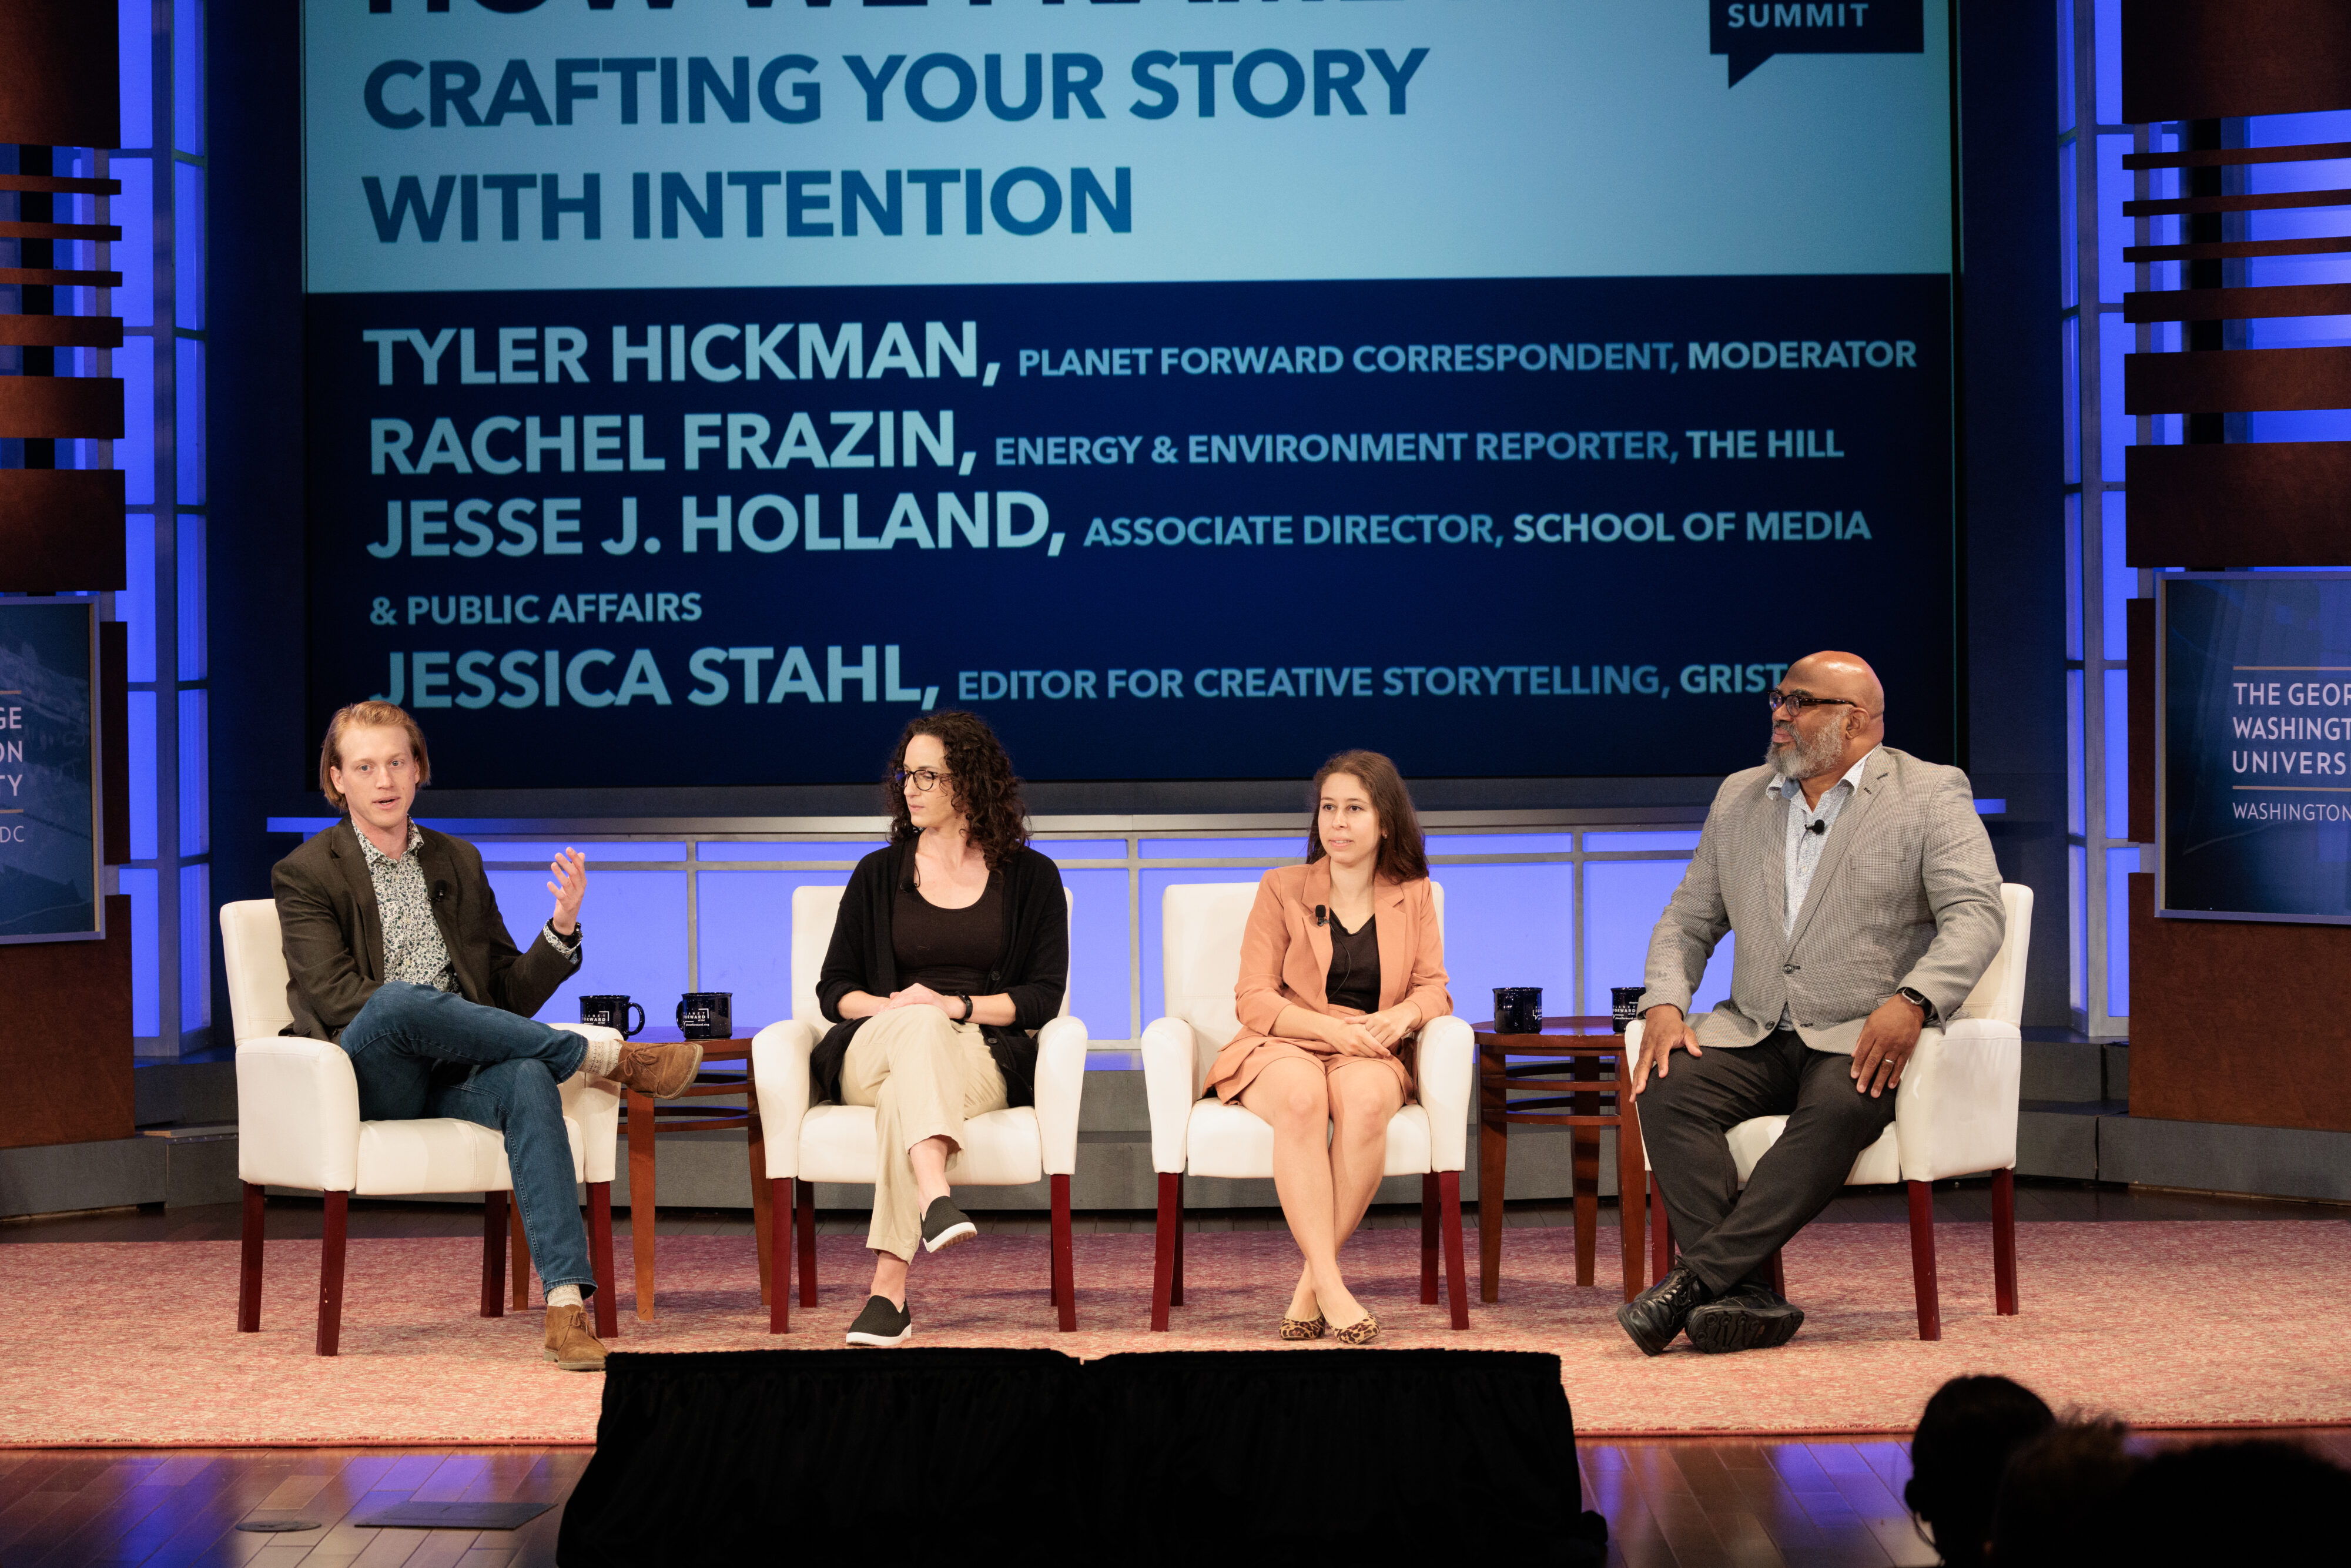 From left: Tyler Hickman, University of Colorado Boulder; Jessica Stahl, Editor for Creative Storytelling, Grist; Rachel Frazin, Energy & Environment Reporter, The Hill; and Jesse J. Holland, Associate Director SMPA; discuss the future of environmental journalism. 